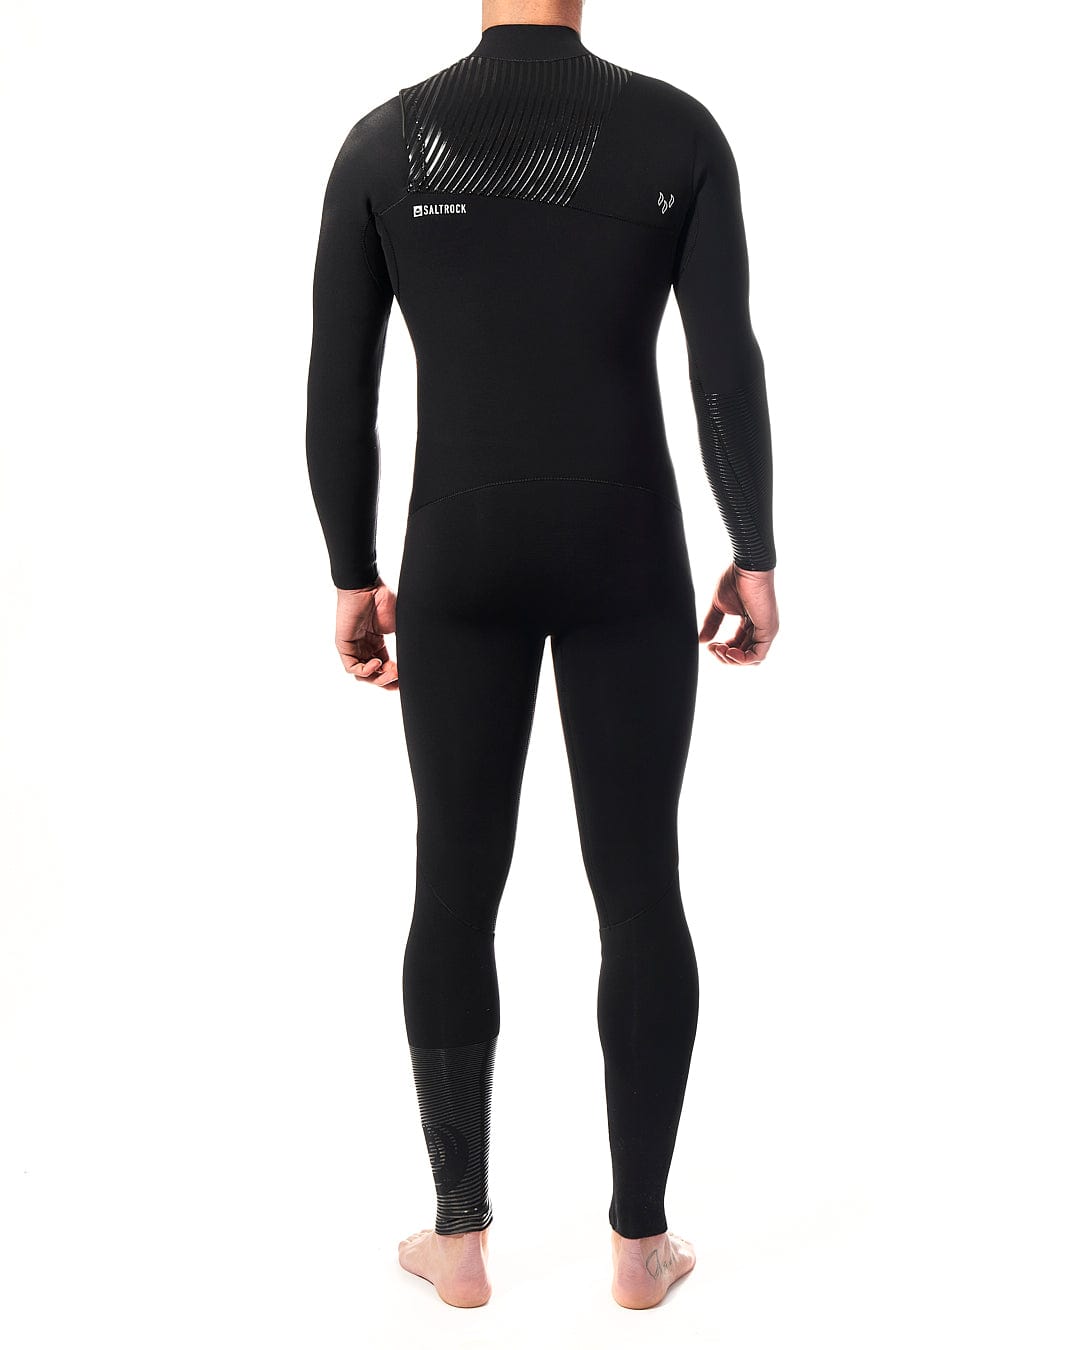 The back view of a man in a Saltrock Shockwave - Mens 3/2 Chest Zip Full Wetsuit - Black.